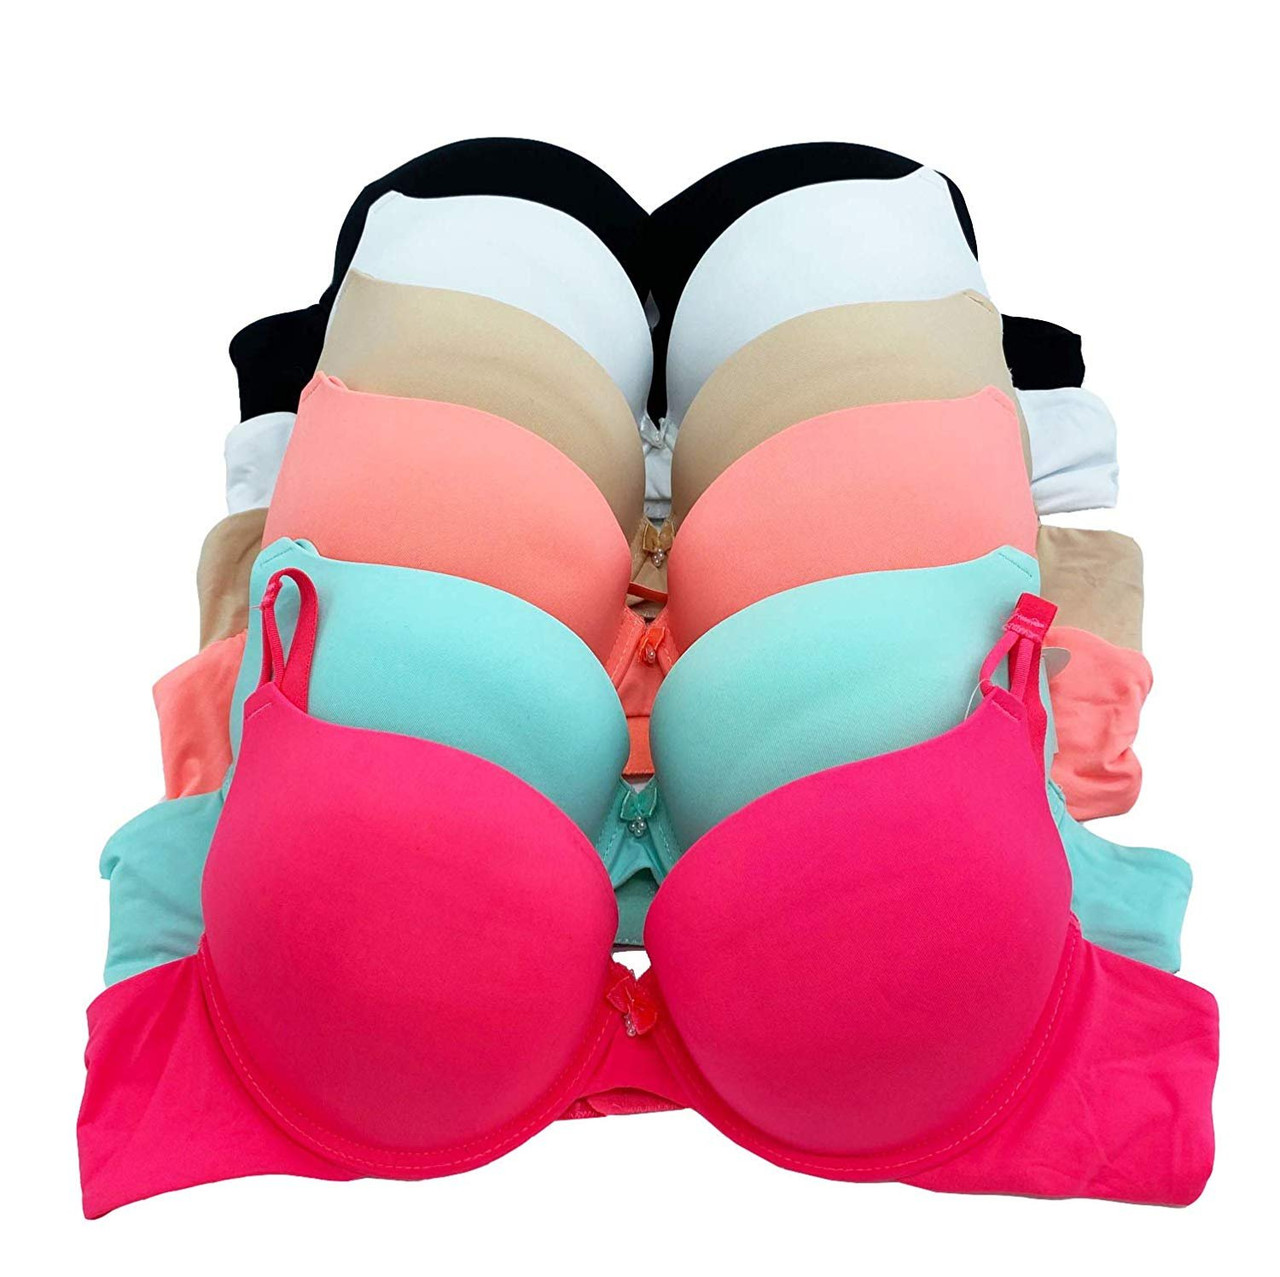 SIX PACK FULL CUP EXTREME PUSH UP BRAS